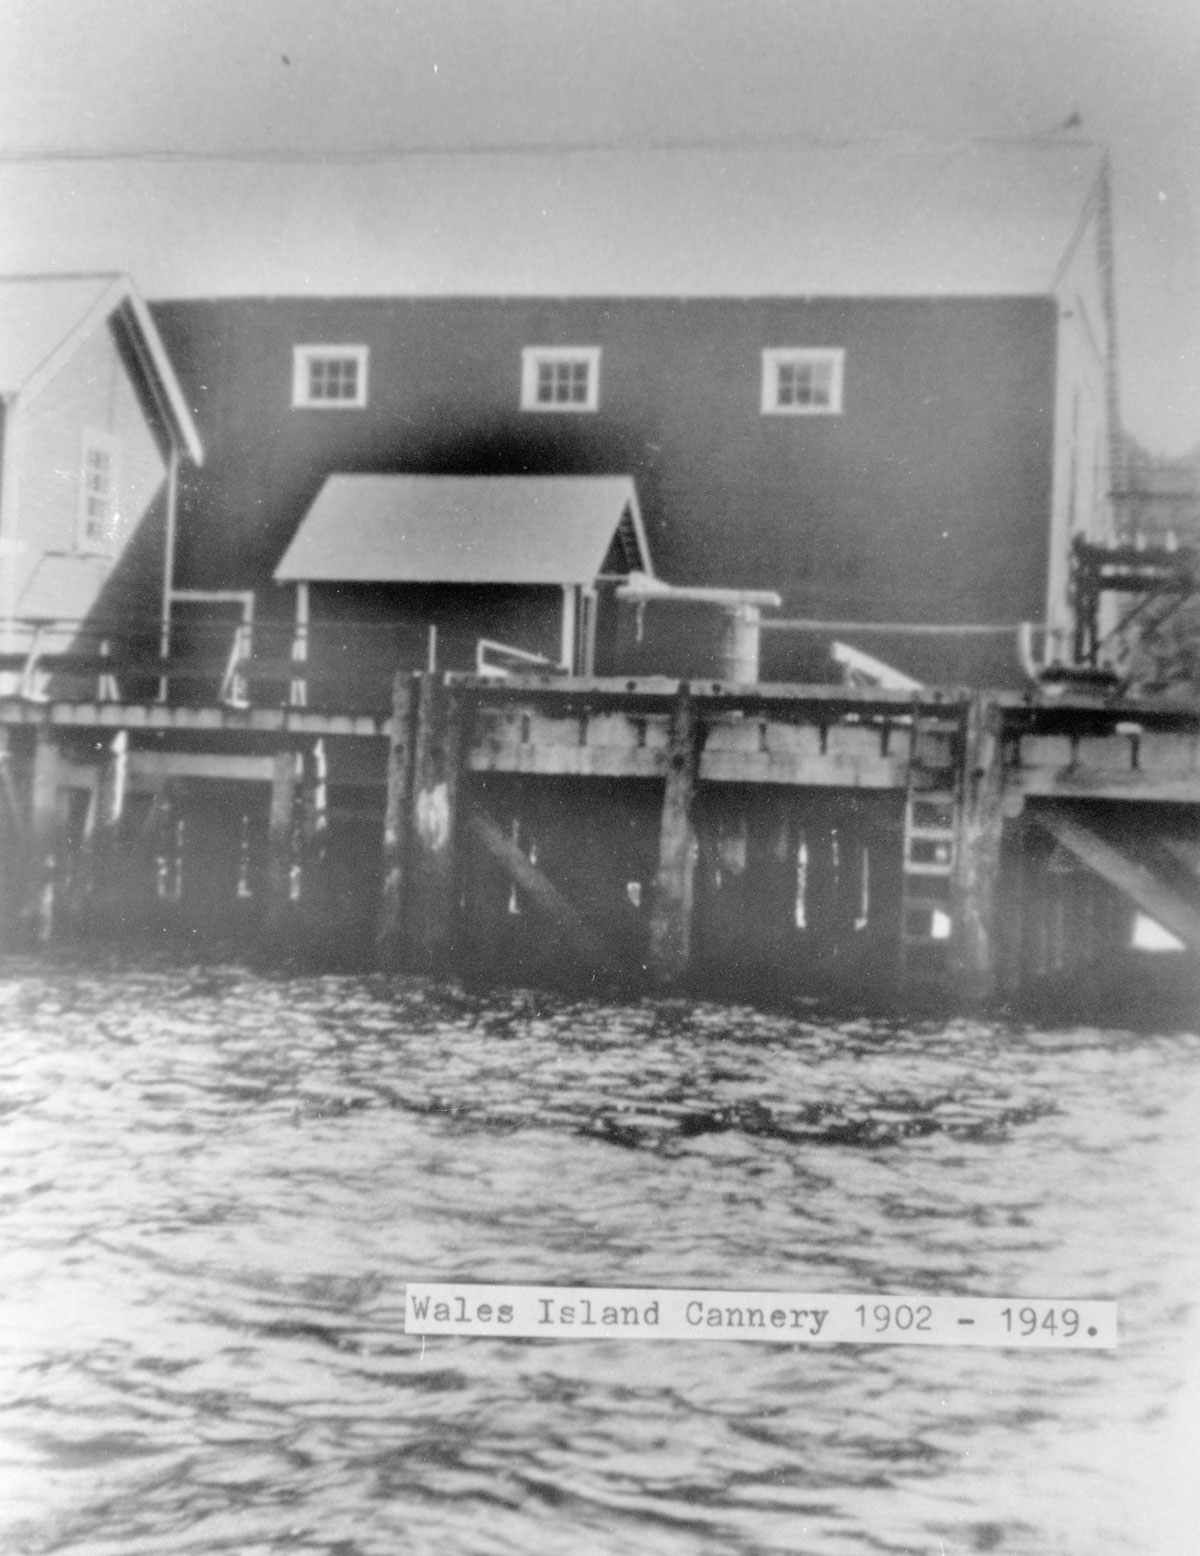 Wharf and cannery buildings at Wales Island